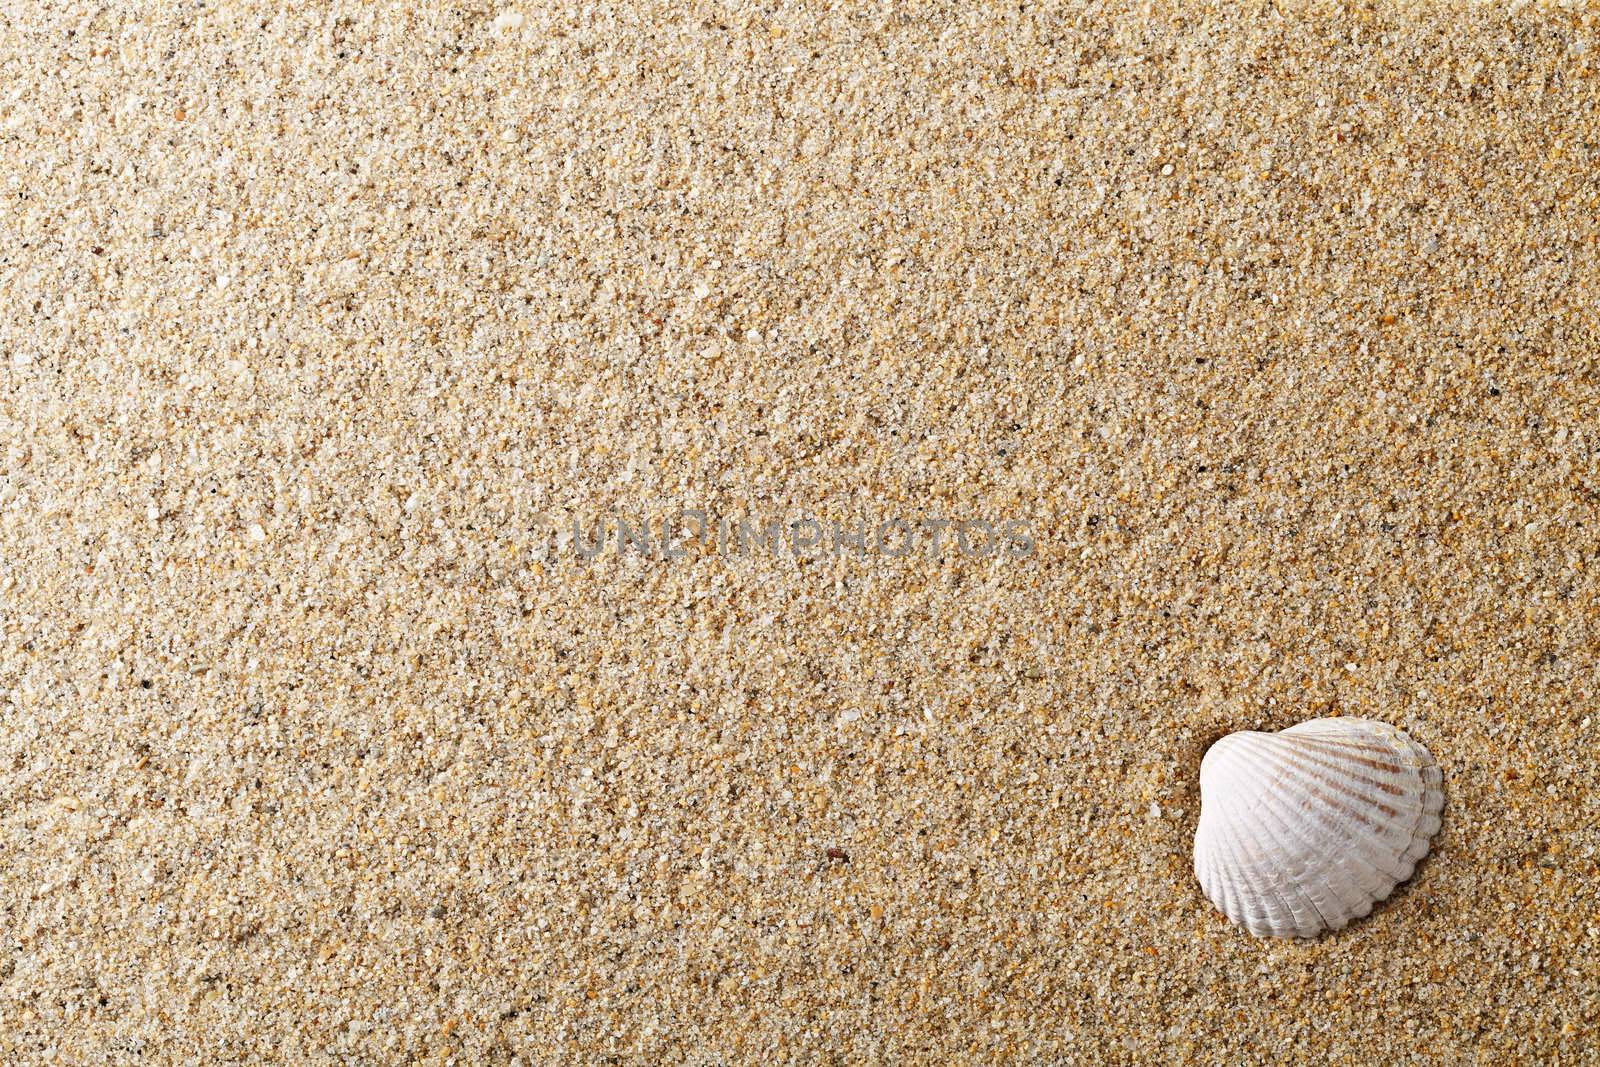 Sea shell on sand. Summer beach for background. Copy space 